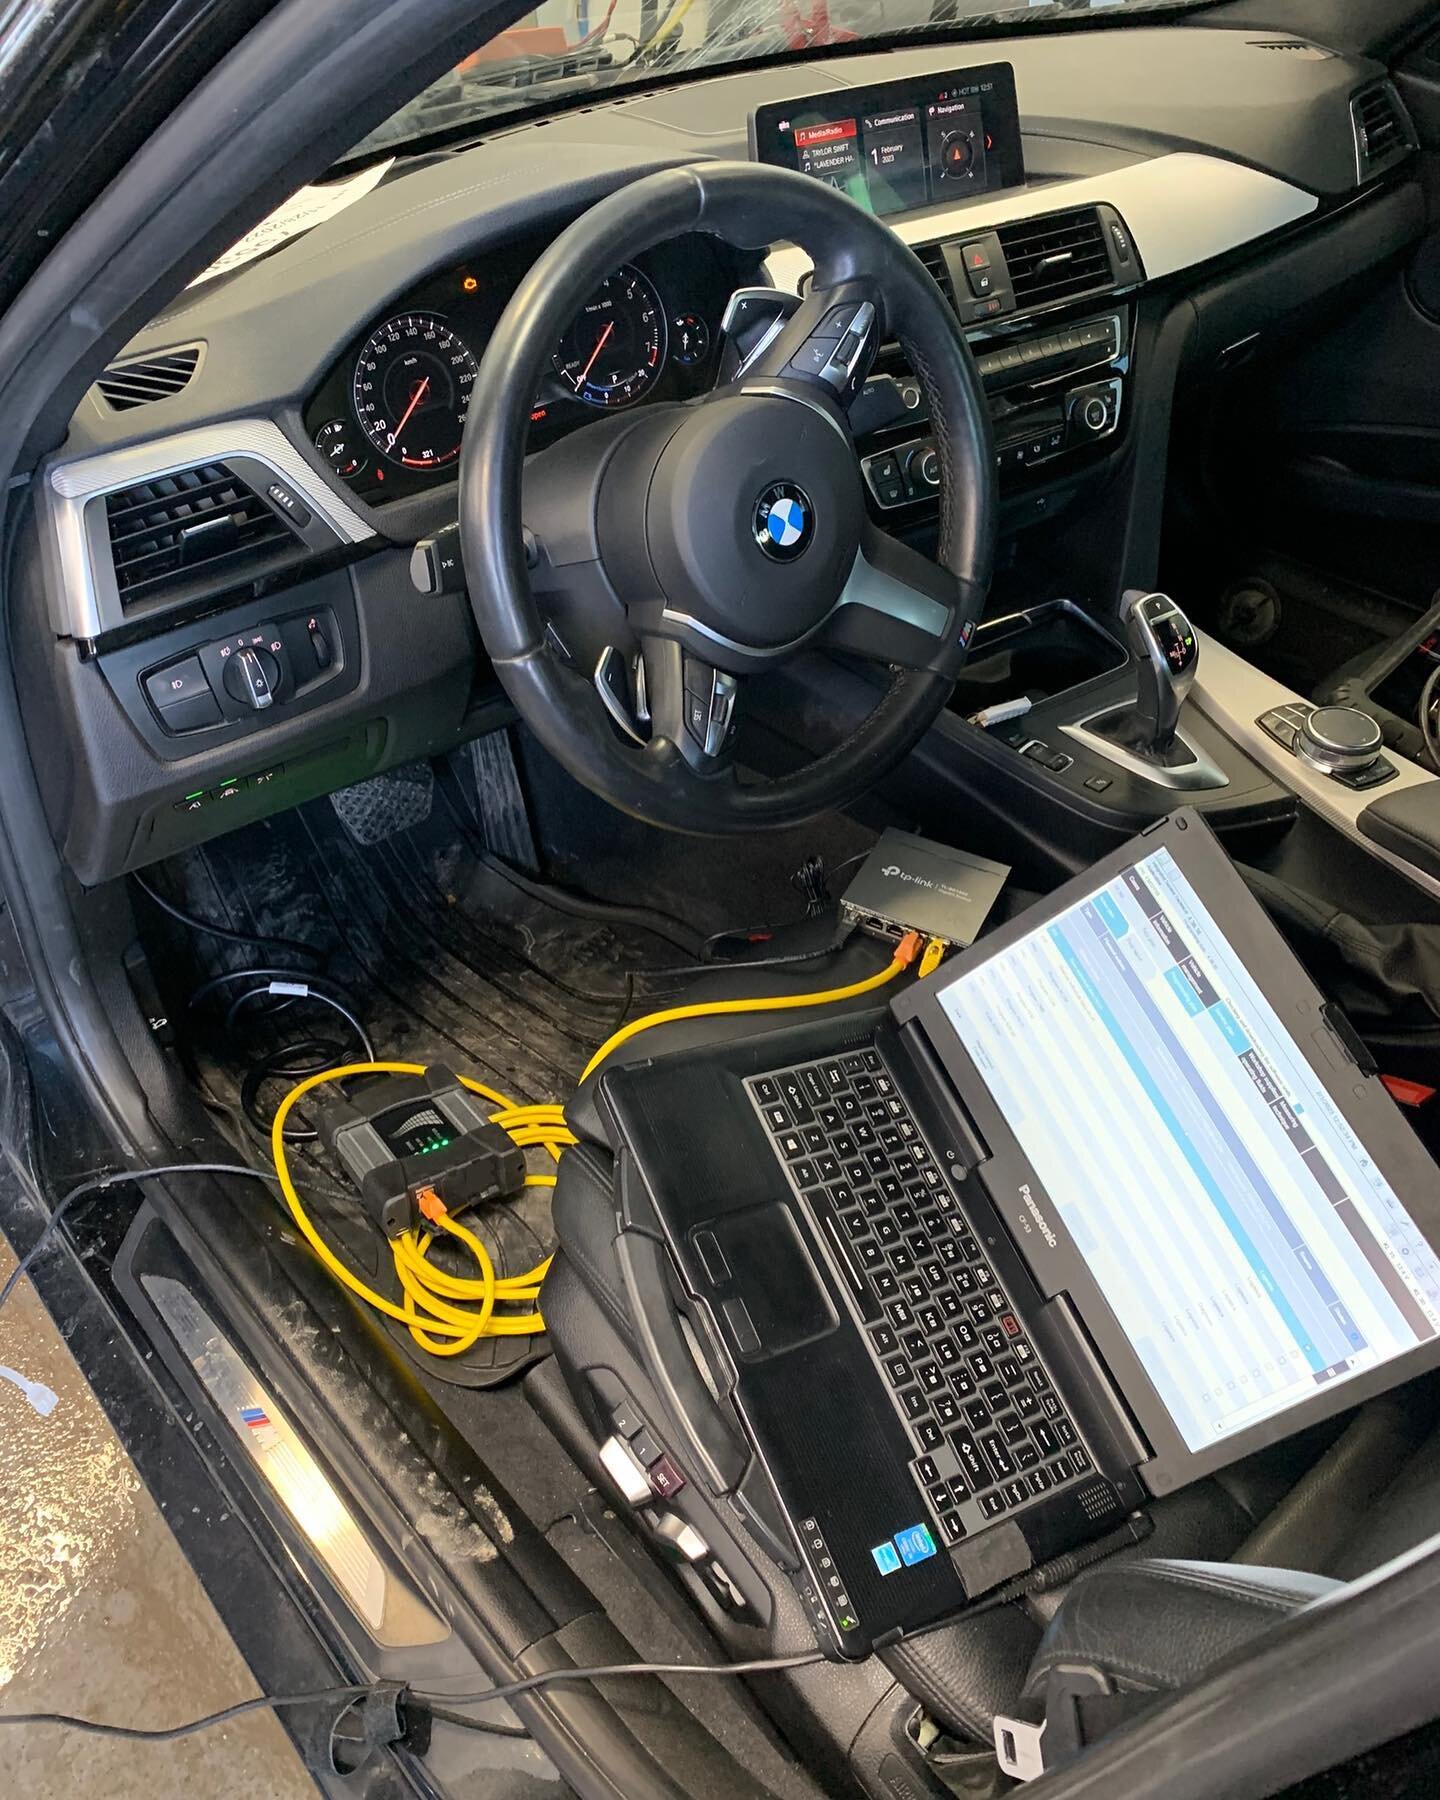 2018 BMW F30 I-Level update and a 2022 Audi Q3 module replacement SVM coding 📲

OE coverage for your vehicle in the #Ottawa area! Two of our favourite brands here at Volta ✅

#localottawa #automotiverepair #automotivediagnostics #audi #audiq3 #sline